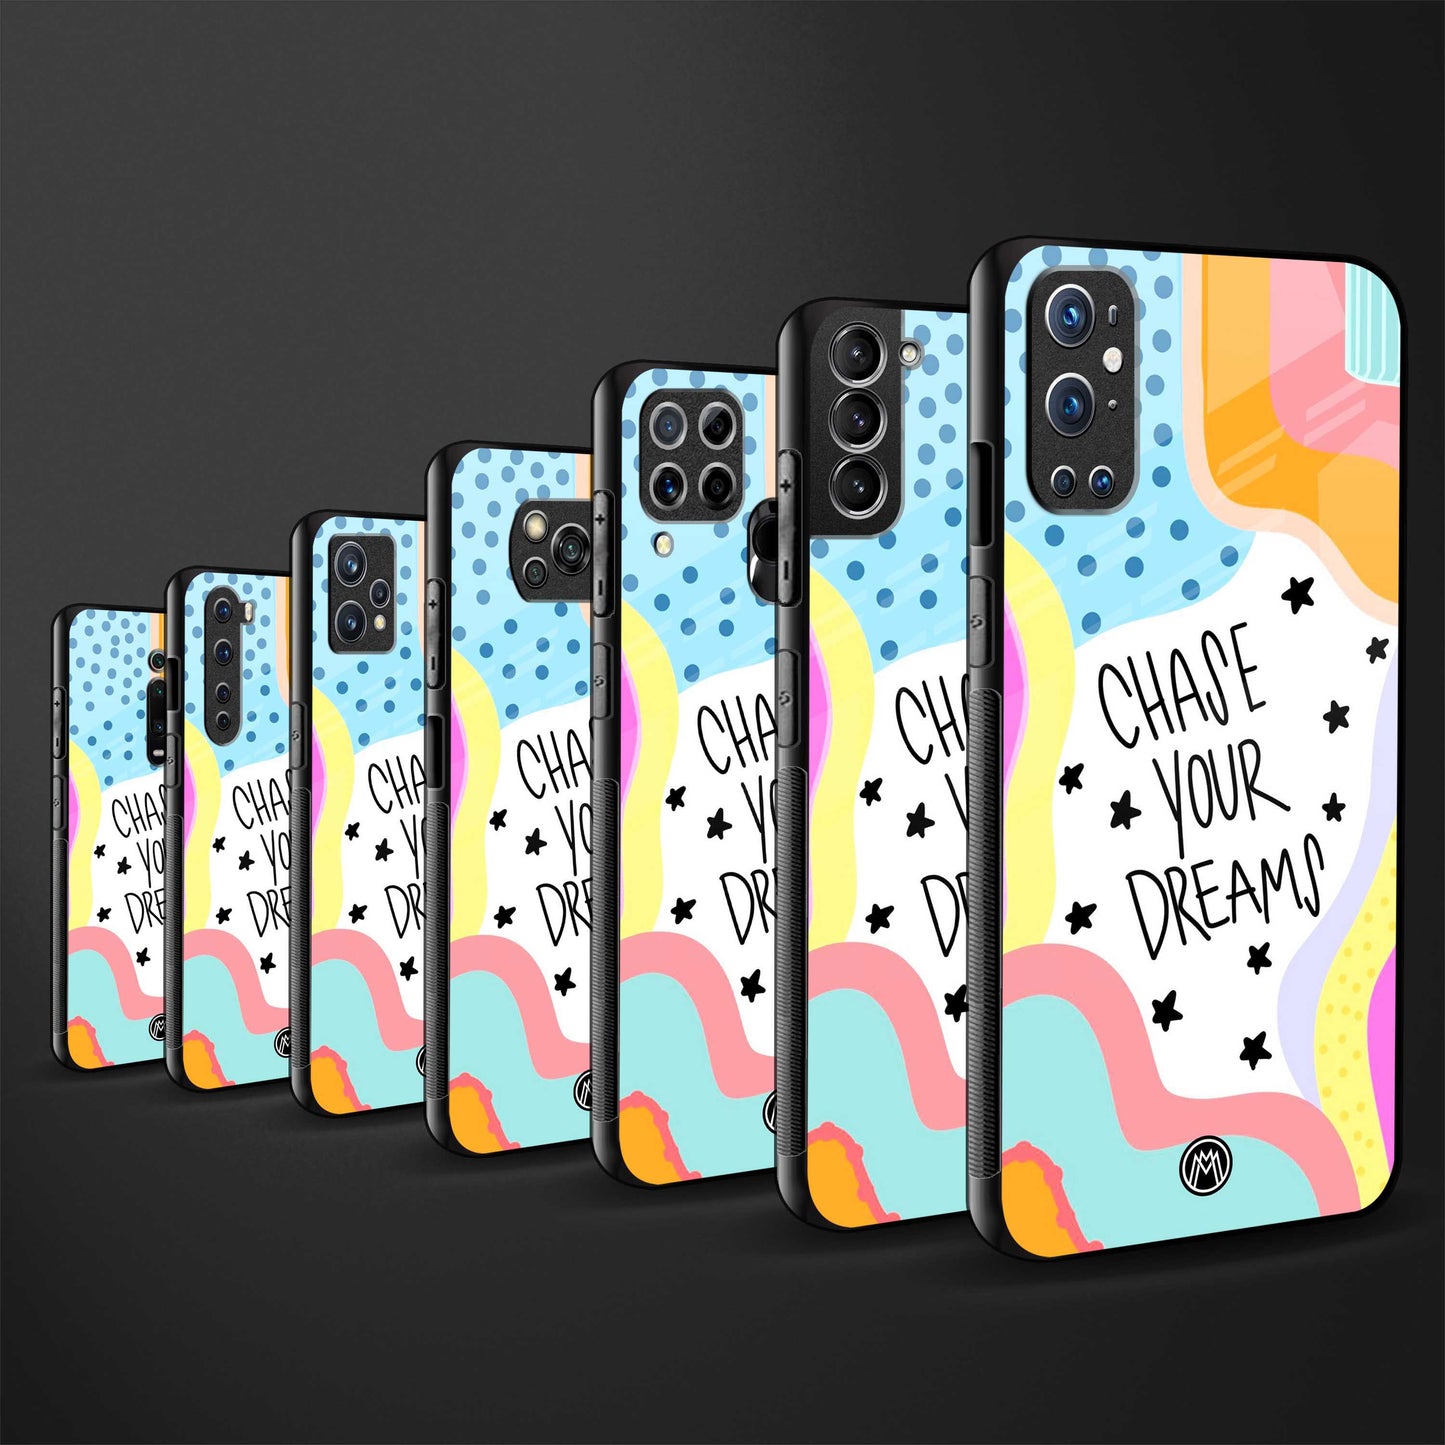 chase your dreams glass case for iphone 12 mini image-3